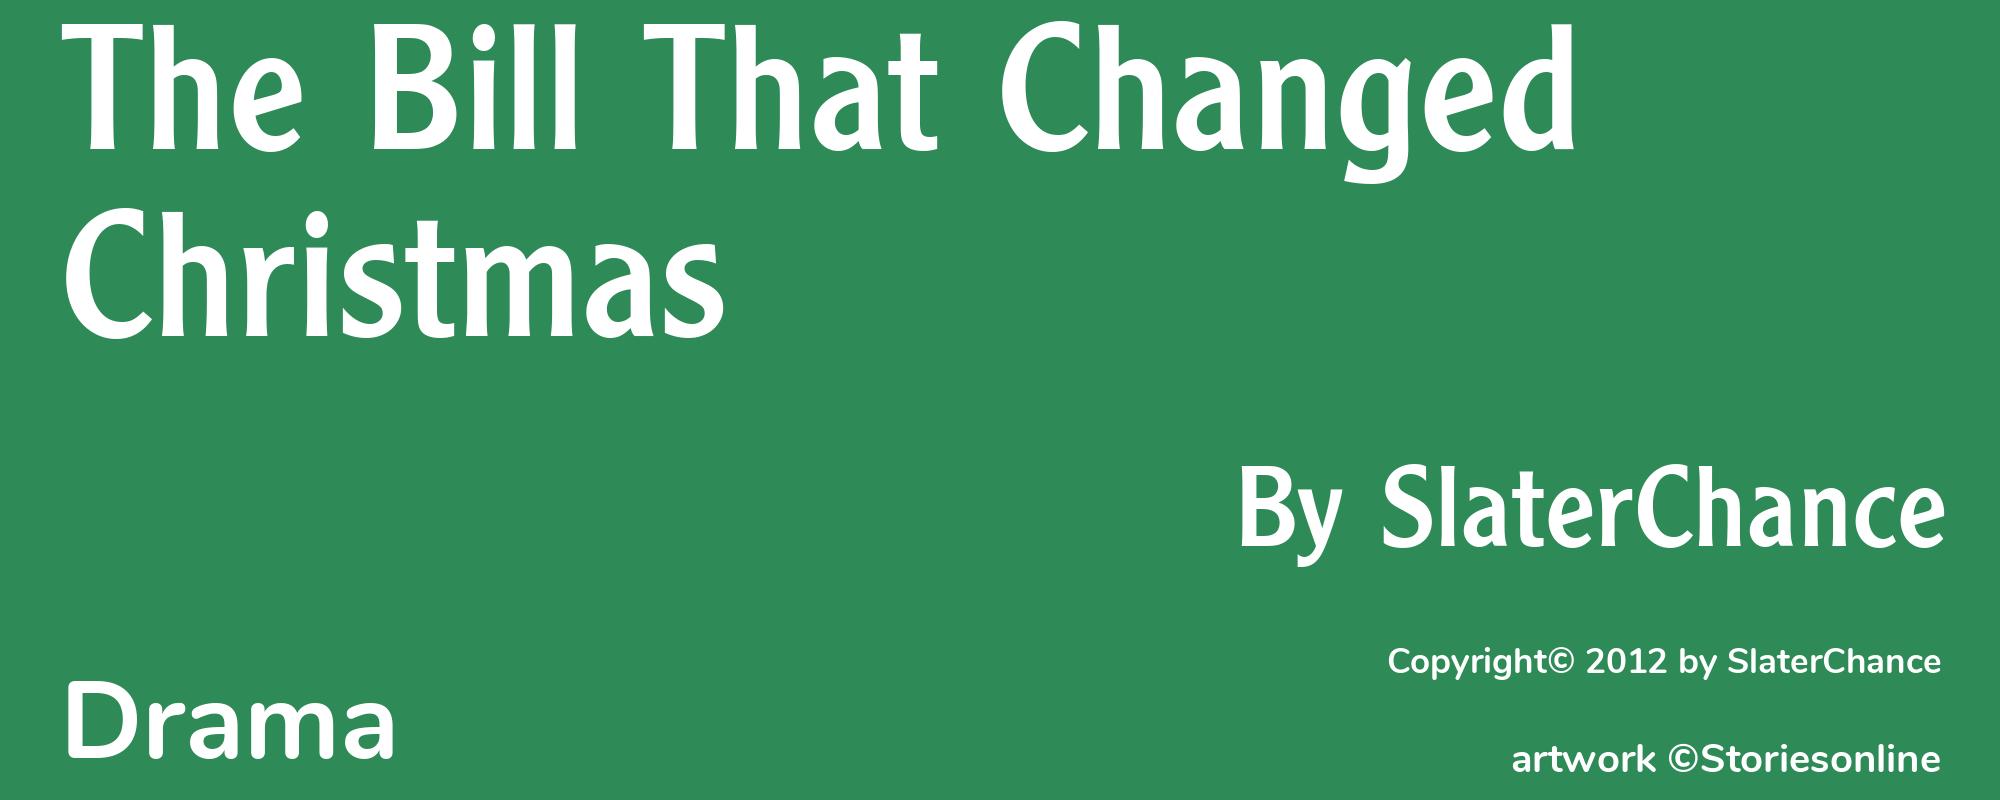 The Bill That Changed Christmas - Cover